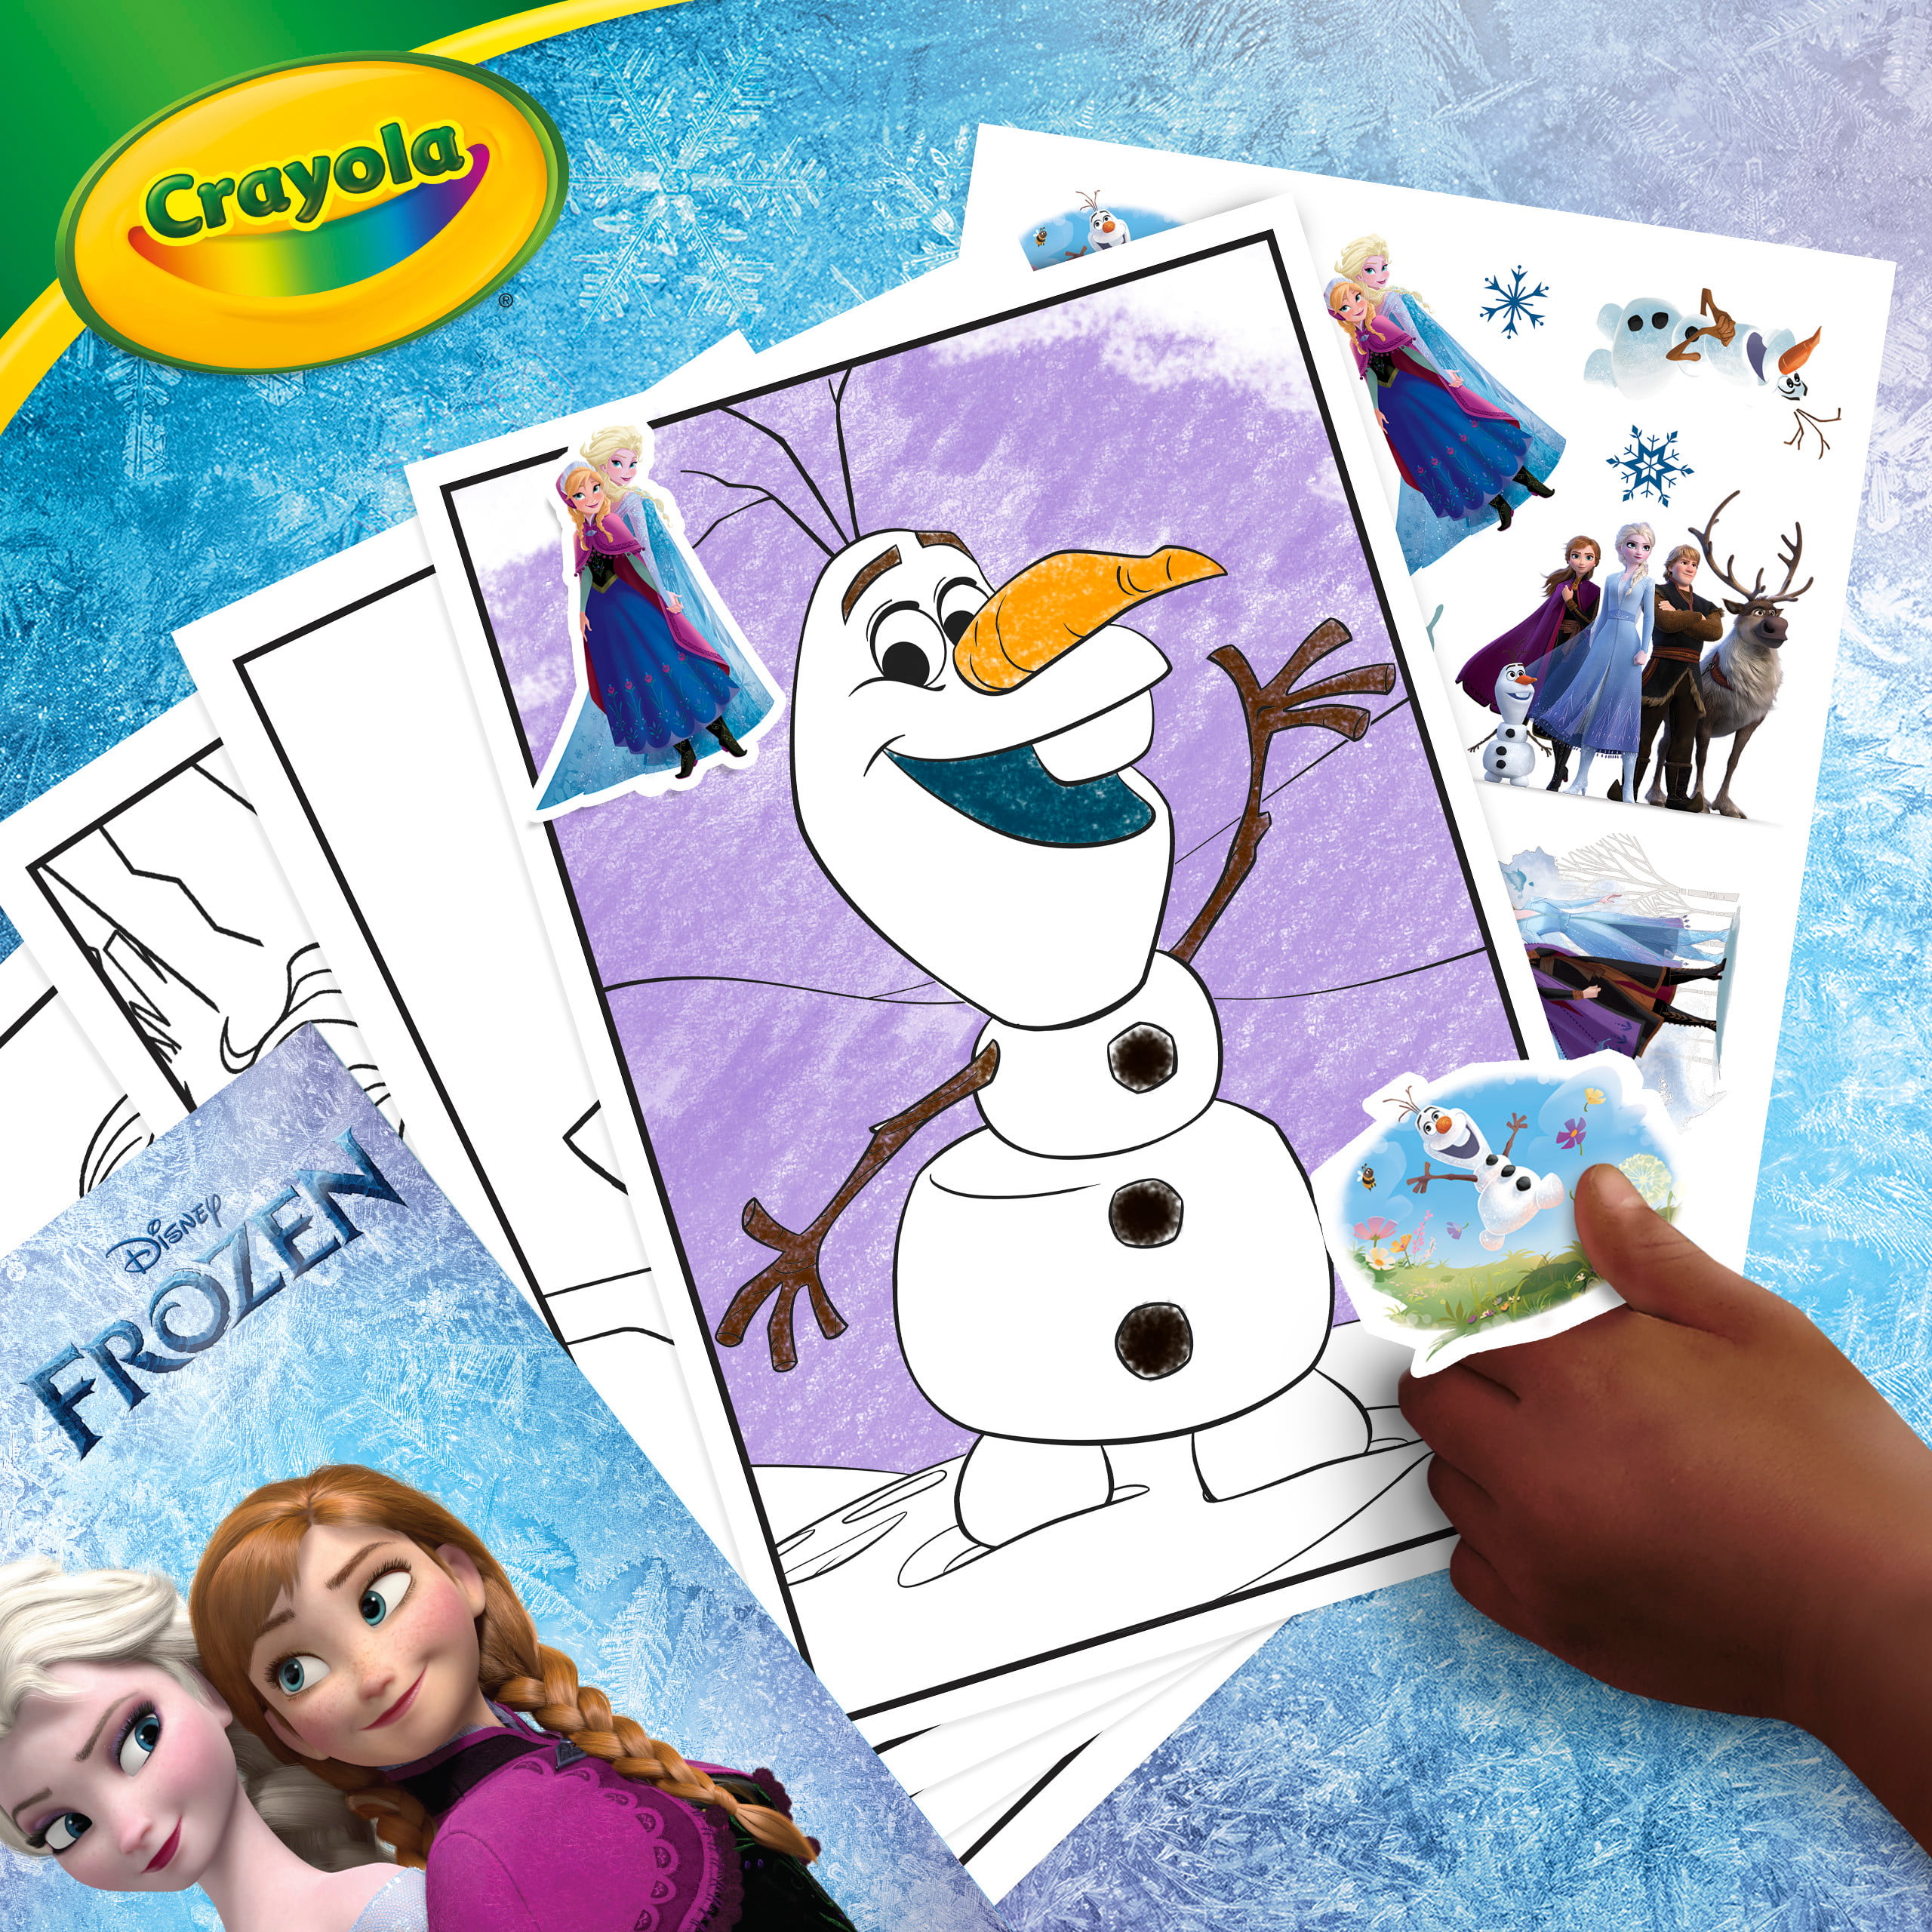 Crayola Frozen 2 Coloring Book with Stickers, 96 Pages, Gift for